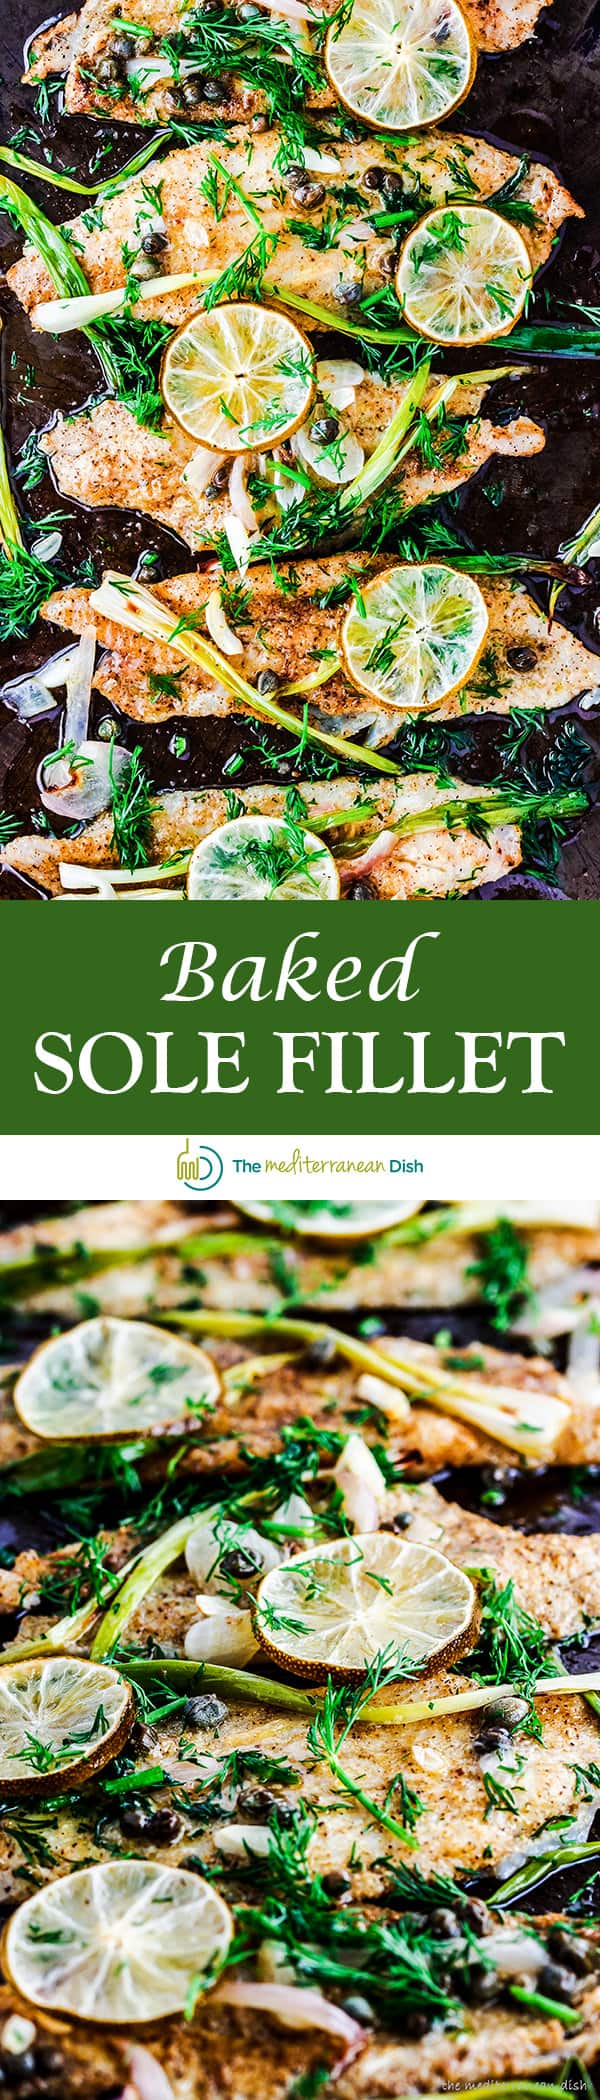 Mediterranean Baked Sole Fillet Recipe | The Mediterranean Dish. 15-minute baked sole fillet with a buttery lime juice, fresh dill and capers. A quick, healthy and delicious dinner! 